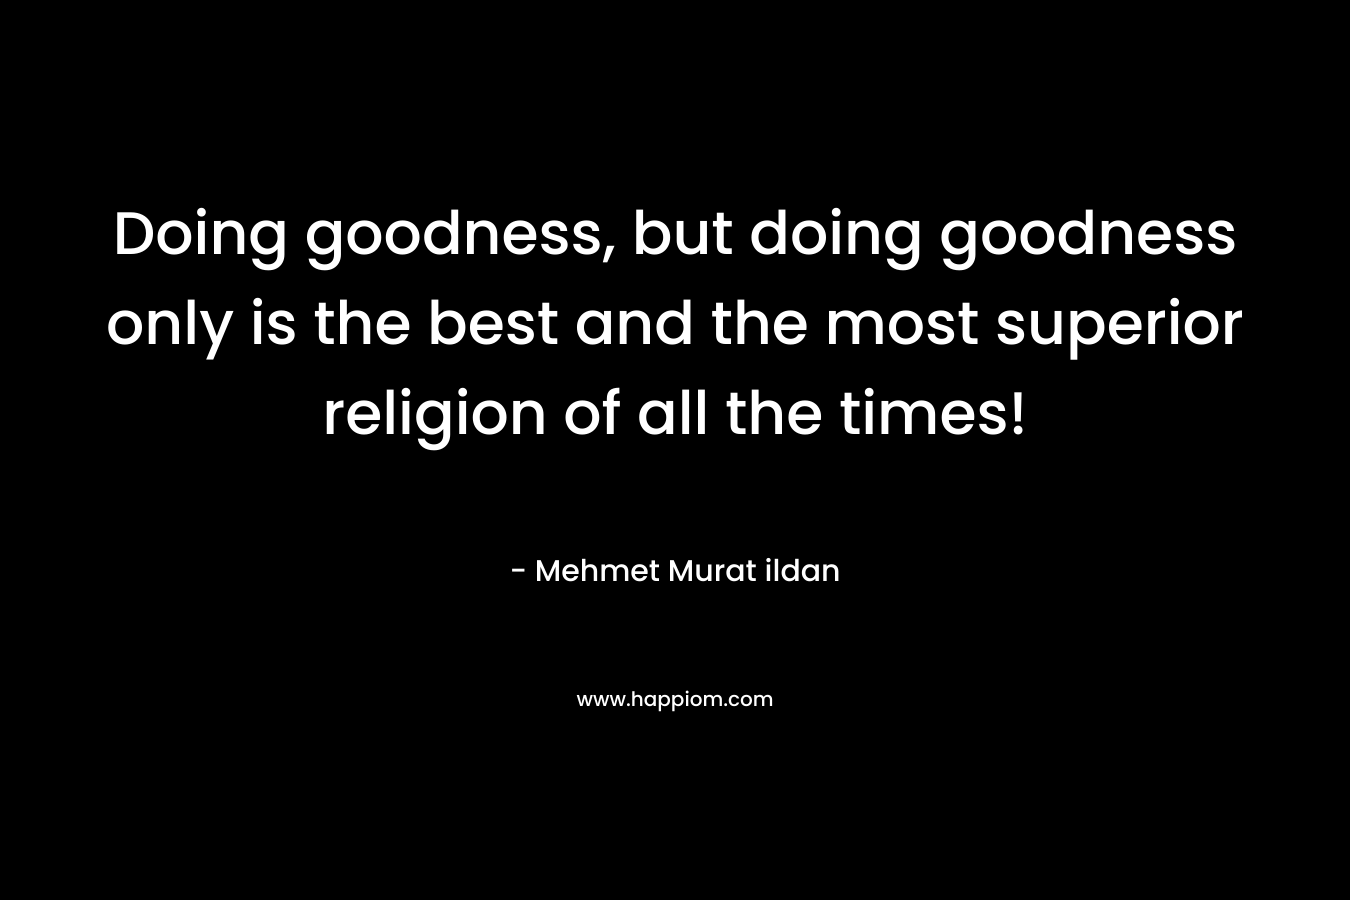 Doing goodness, but doing goodness only is the best and the most superior religion of all the times! – Mehmet Murat ildan